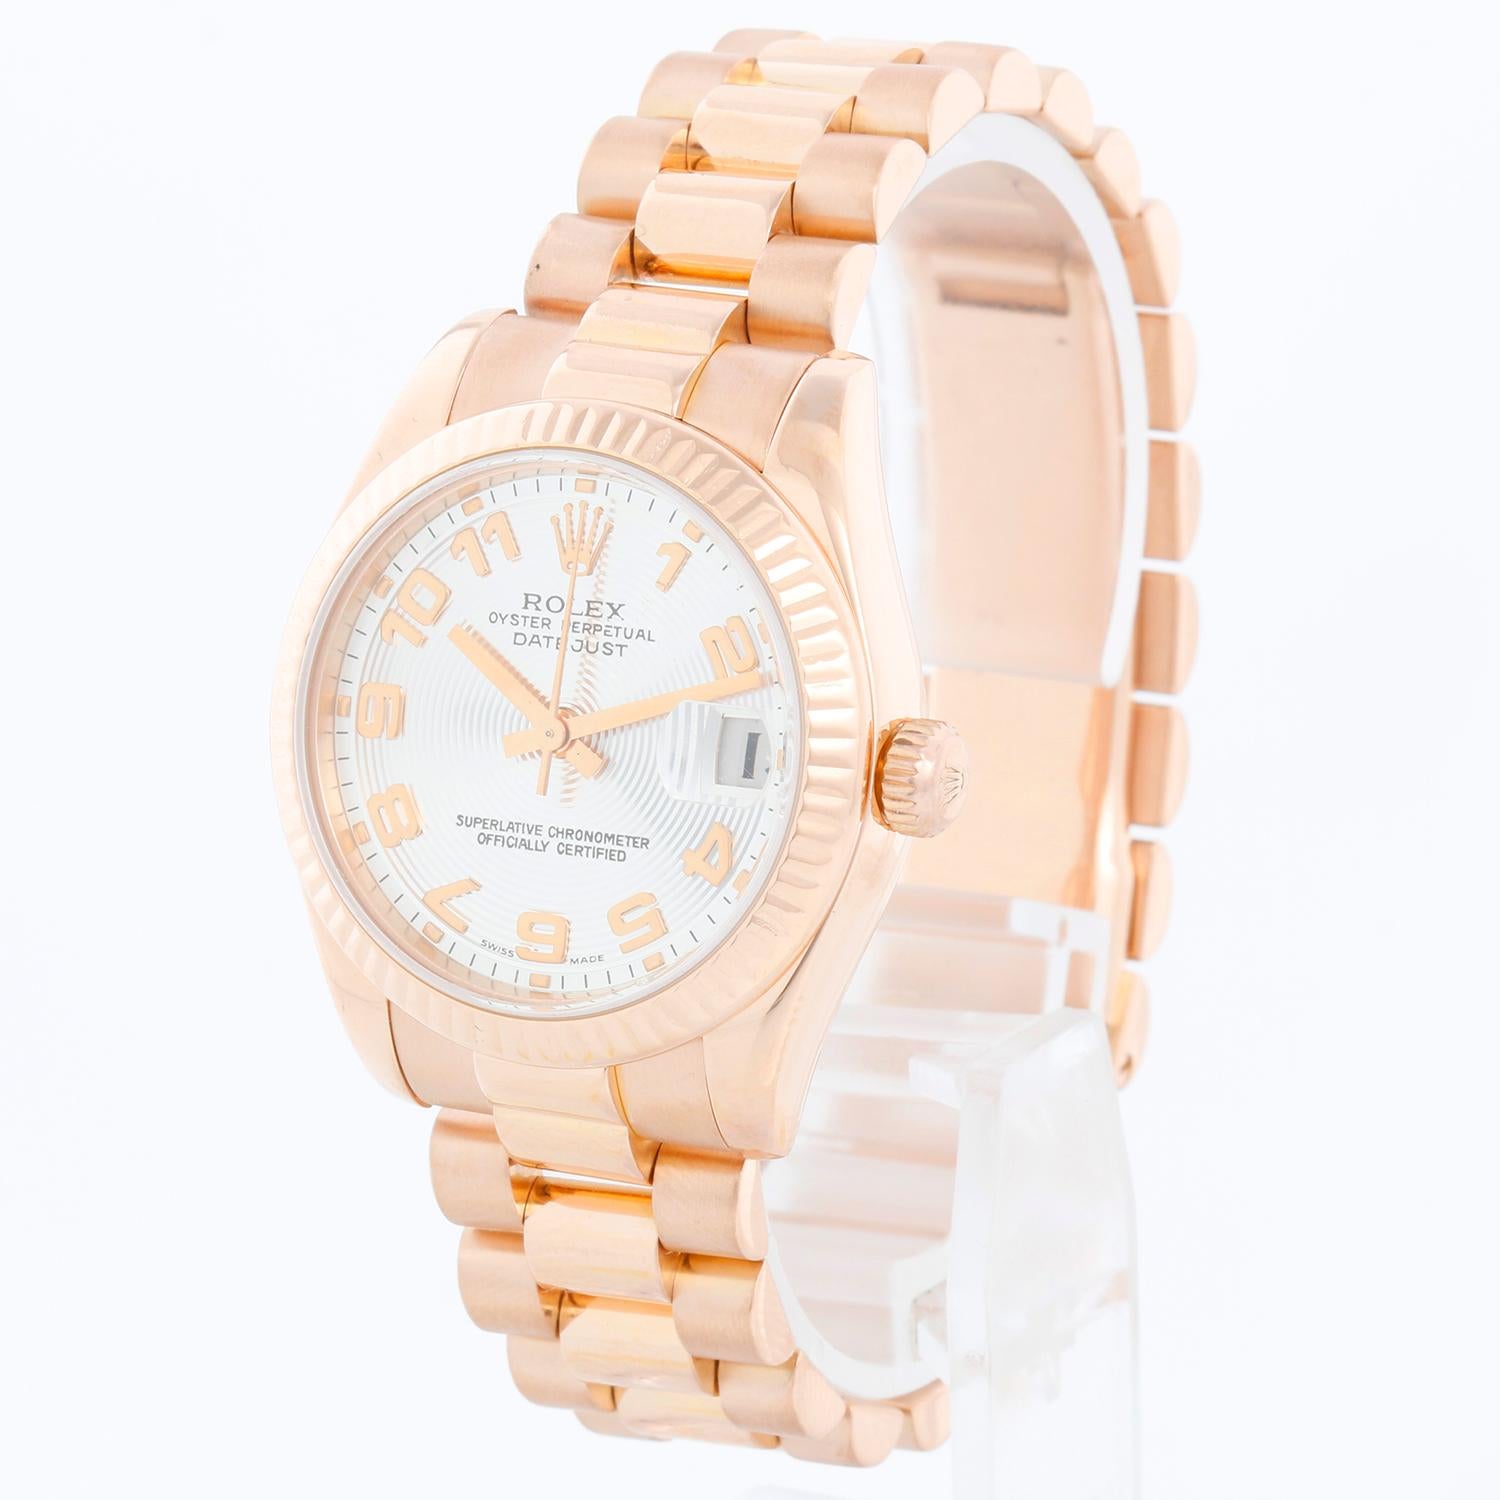 Rolex Datejust Midsize Men's or Ladies Rose Gold Watch 178275 - Automatic winding; 31 jewel; sapphire crystal. 18K Rose gold  case with 18k rose gold fluted bezel (31mm diameter). Silver concentric dial with rose gold Arabic numerals. 18K Rose gold